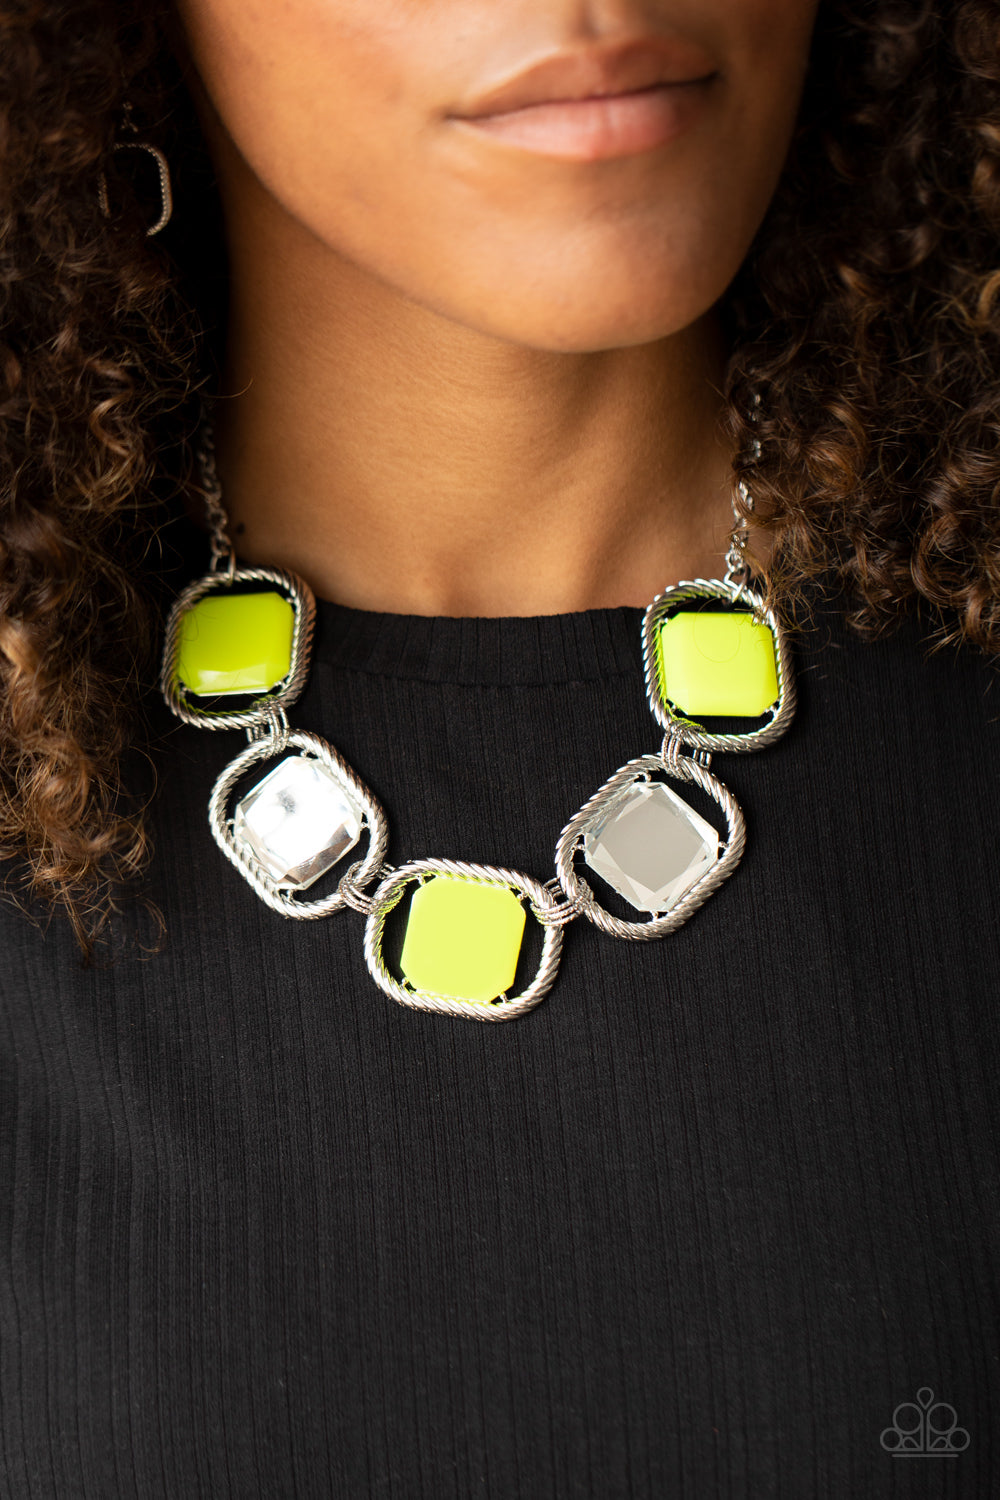 Paparazzi Accessories - Pucker Up - Yellow Necklace